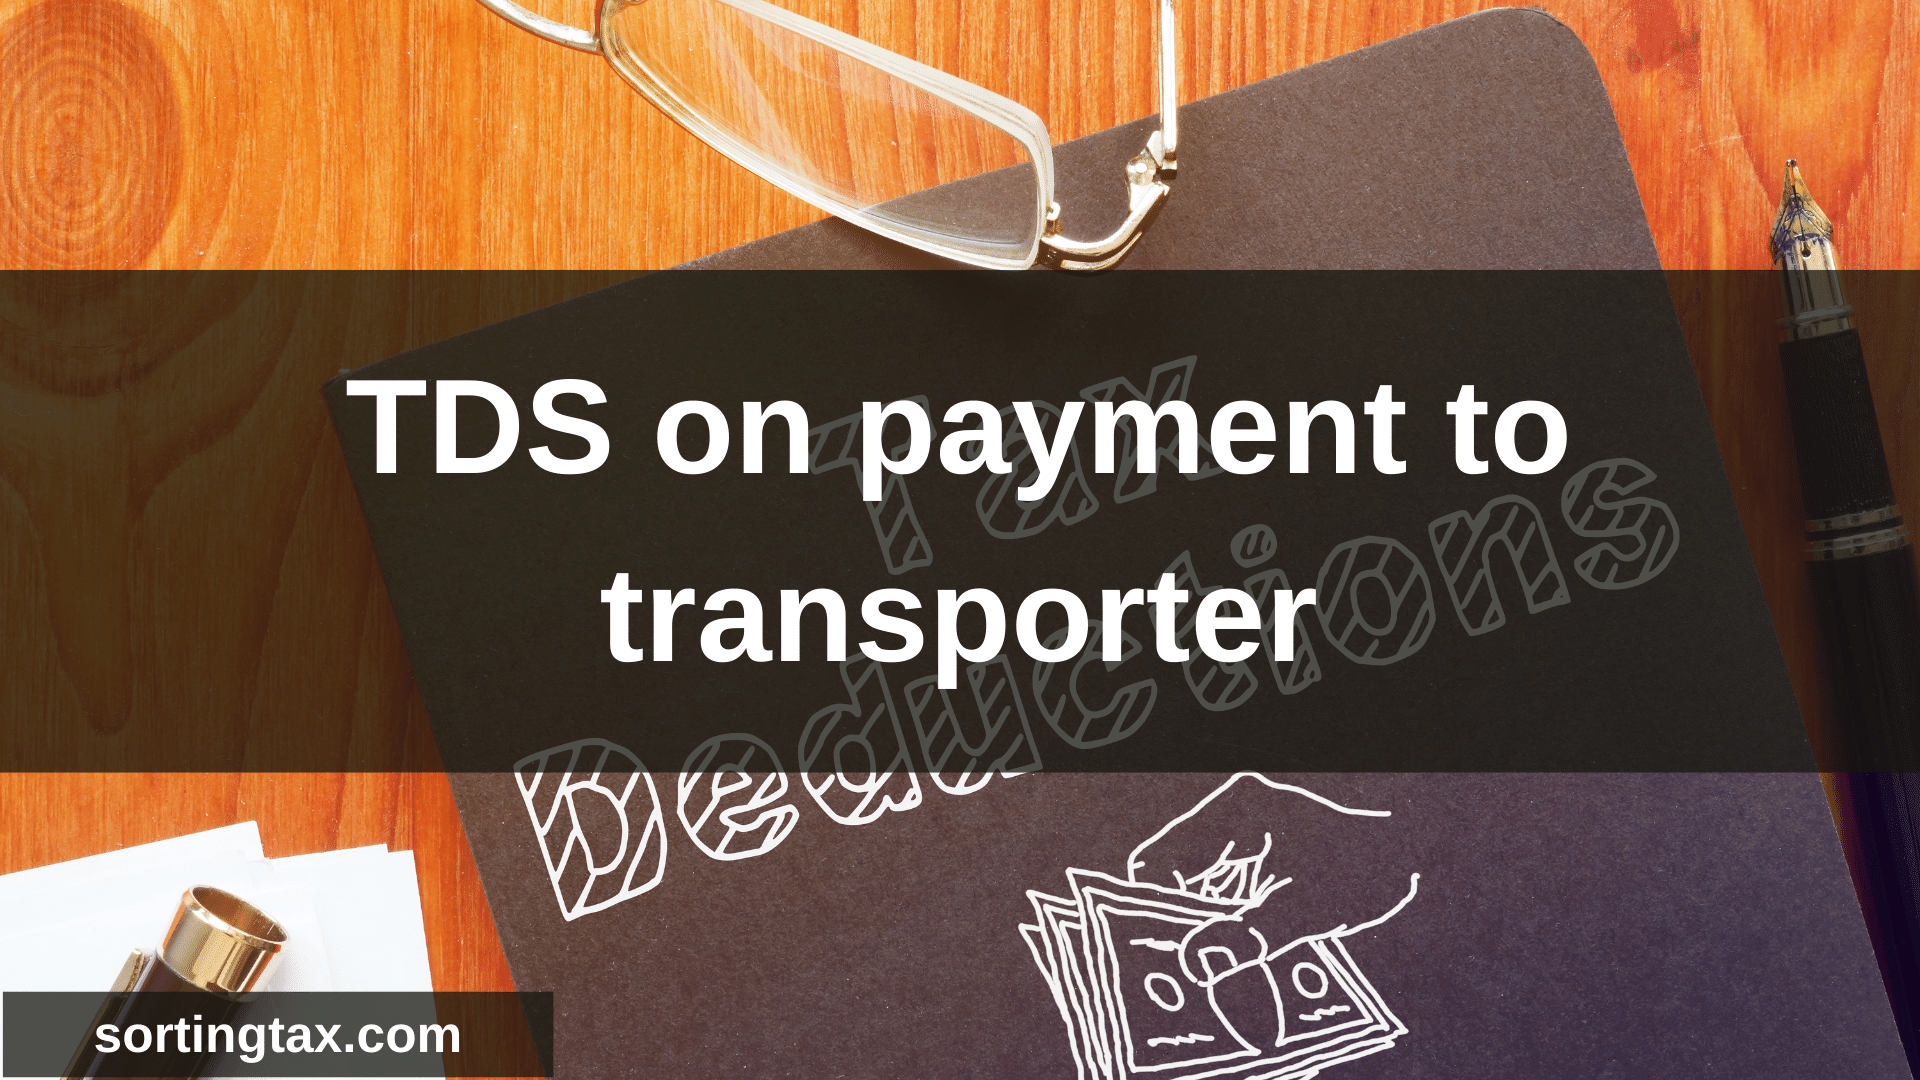 TDS on payment to transporter